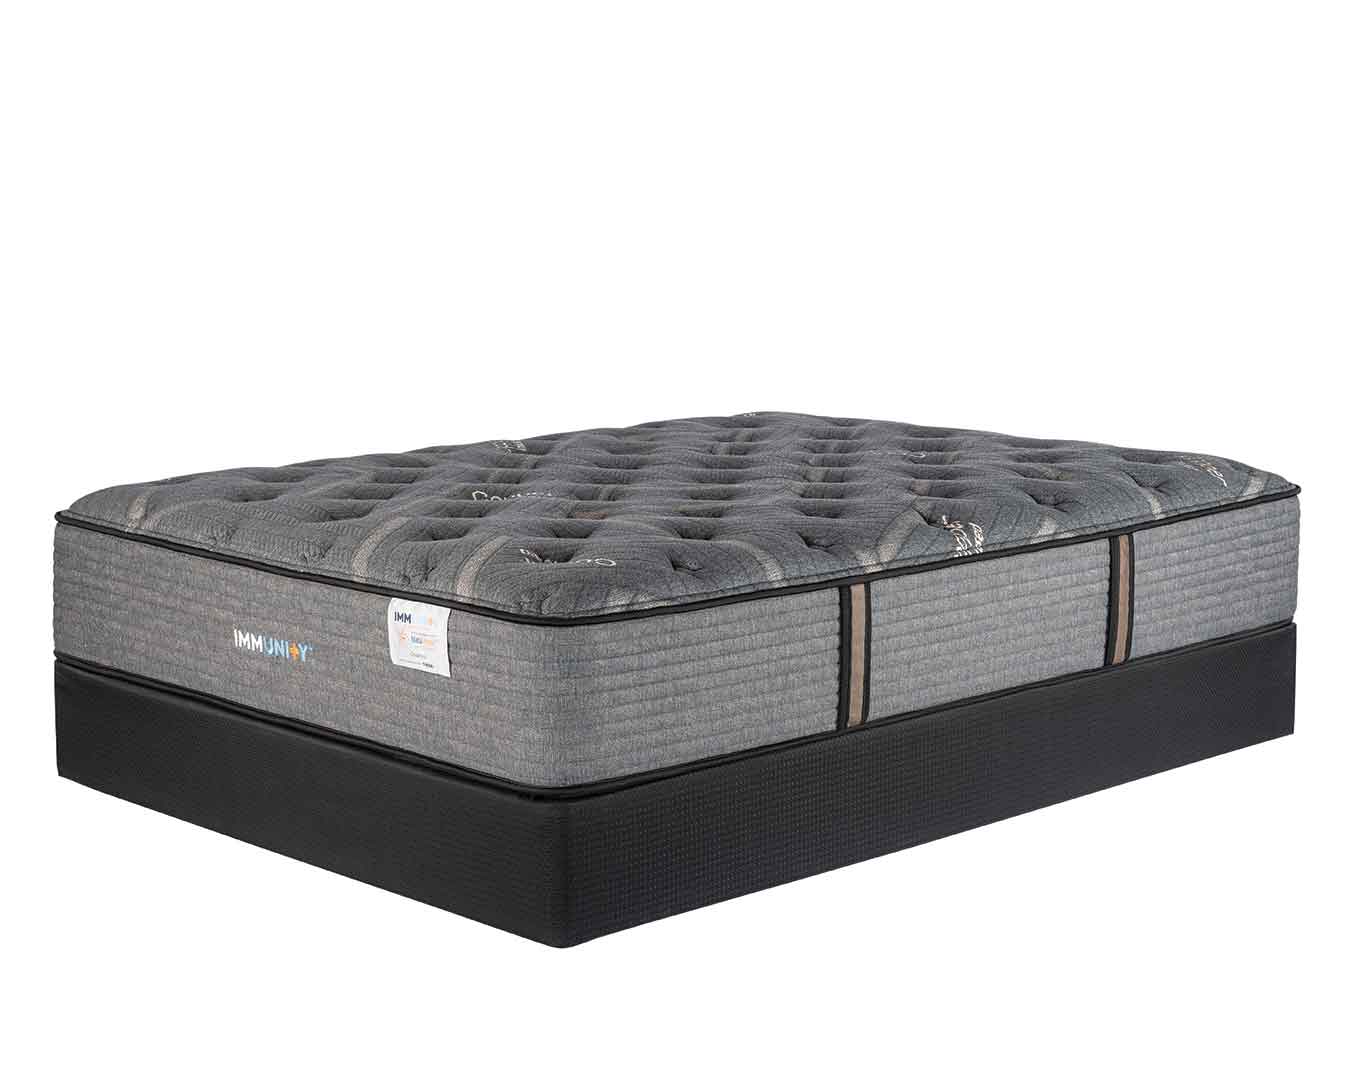 Immunity Chestnut copper mattress on agility foundation at an angle with a white background.